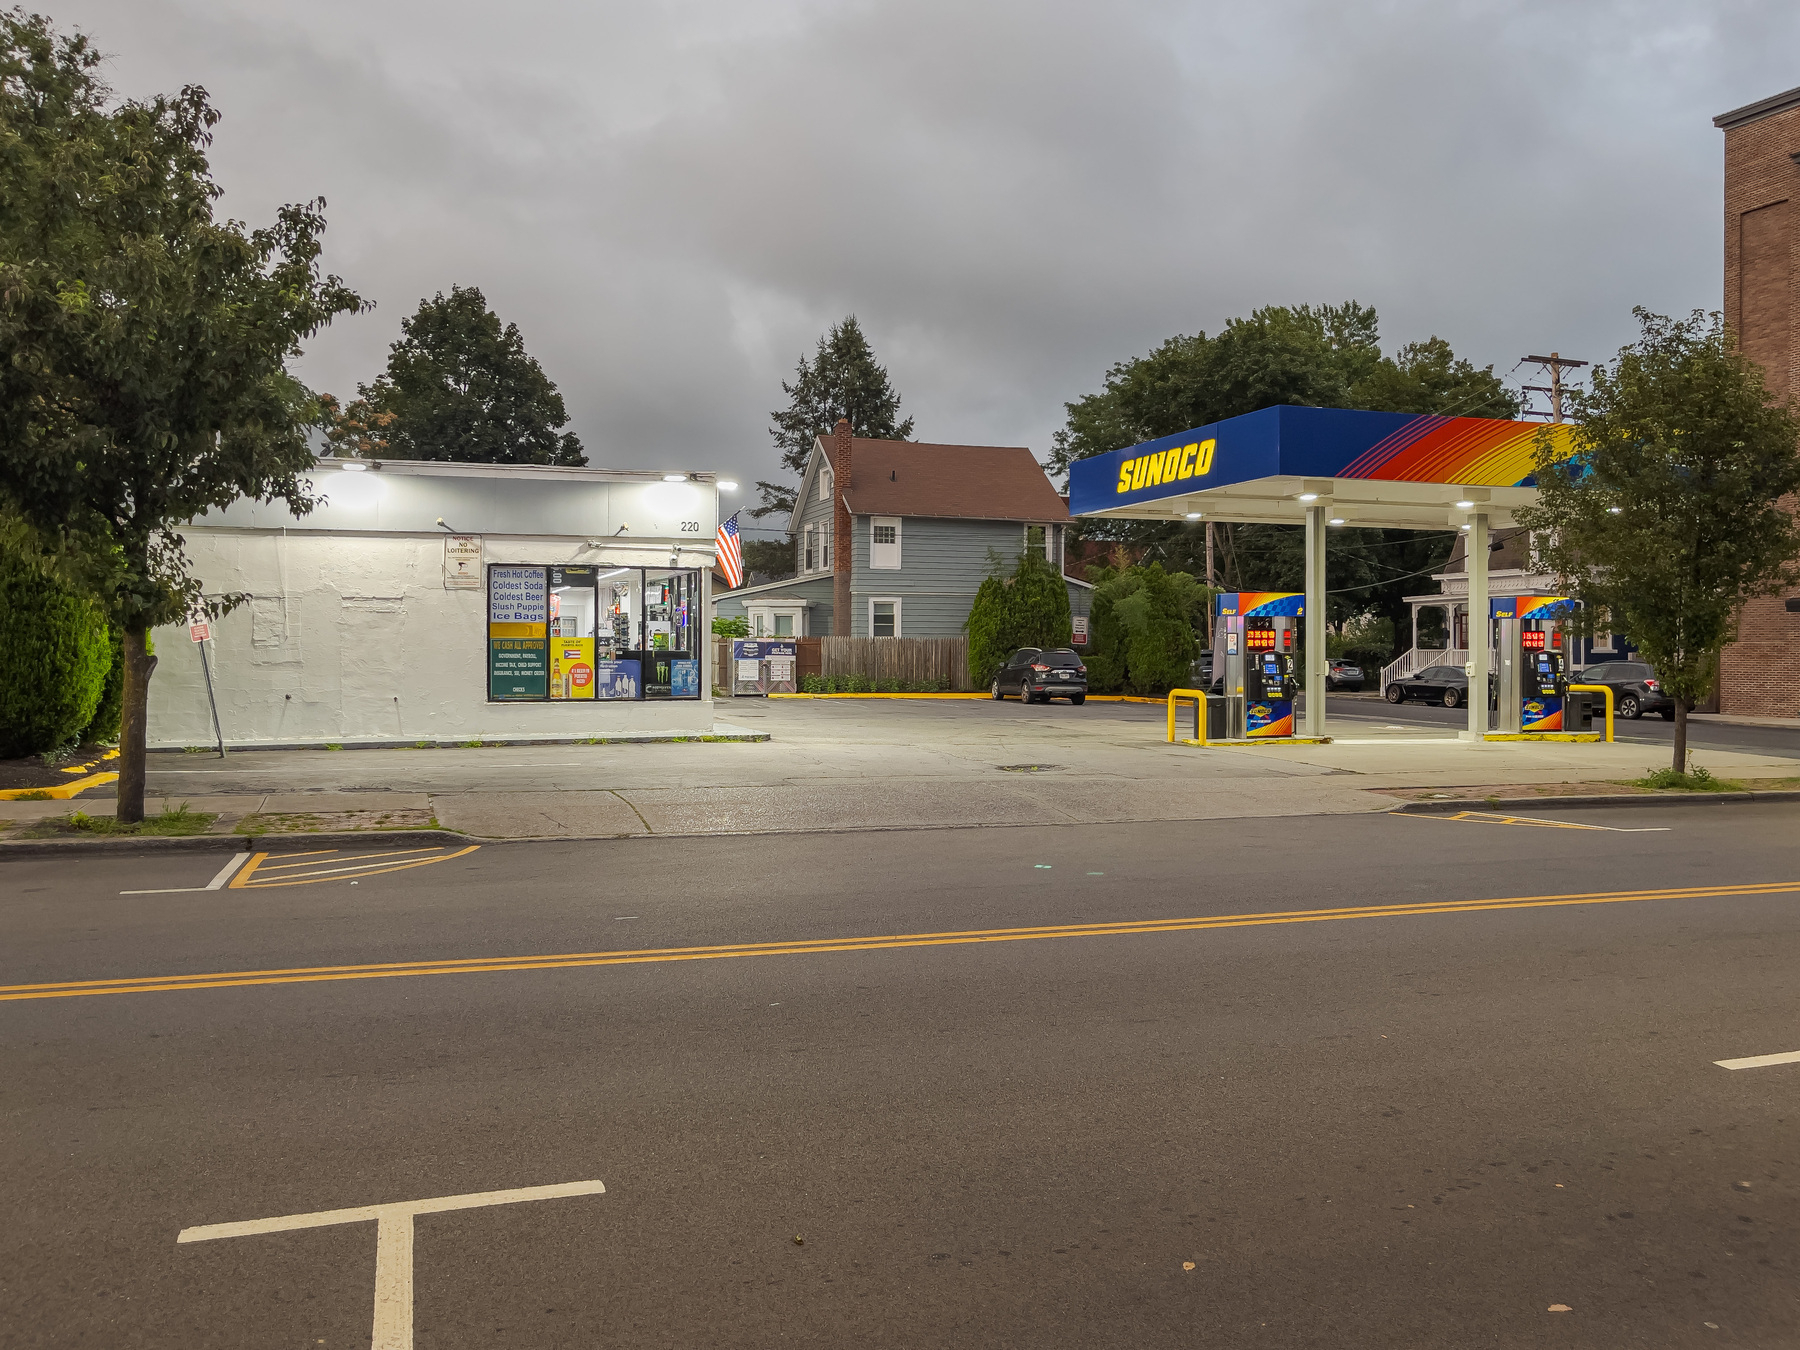 Sunoco gas station on the other side of a street.